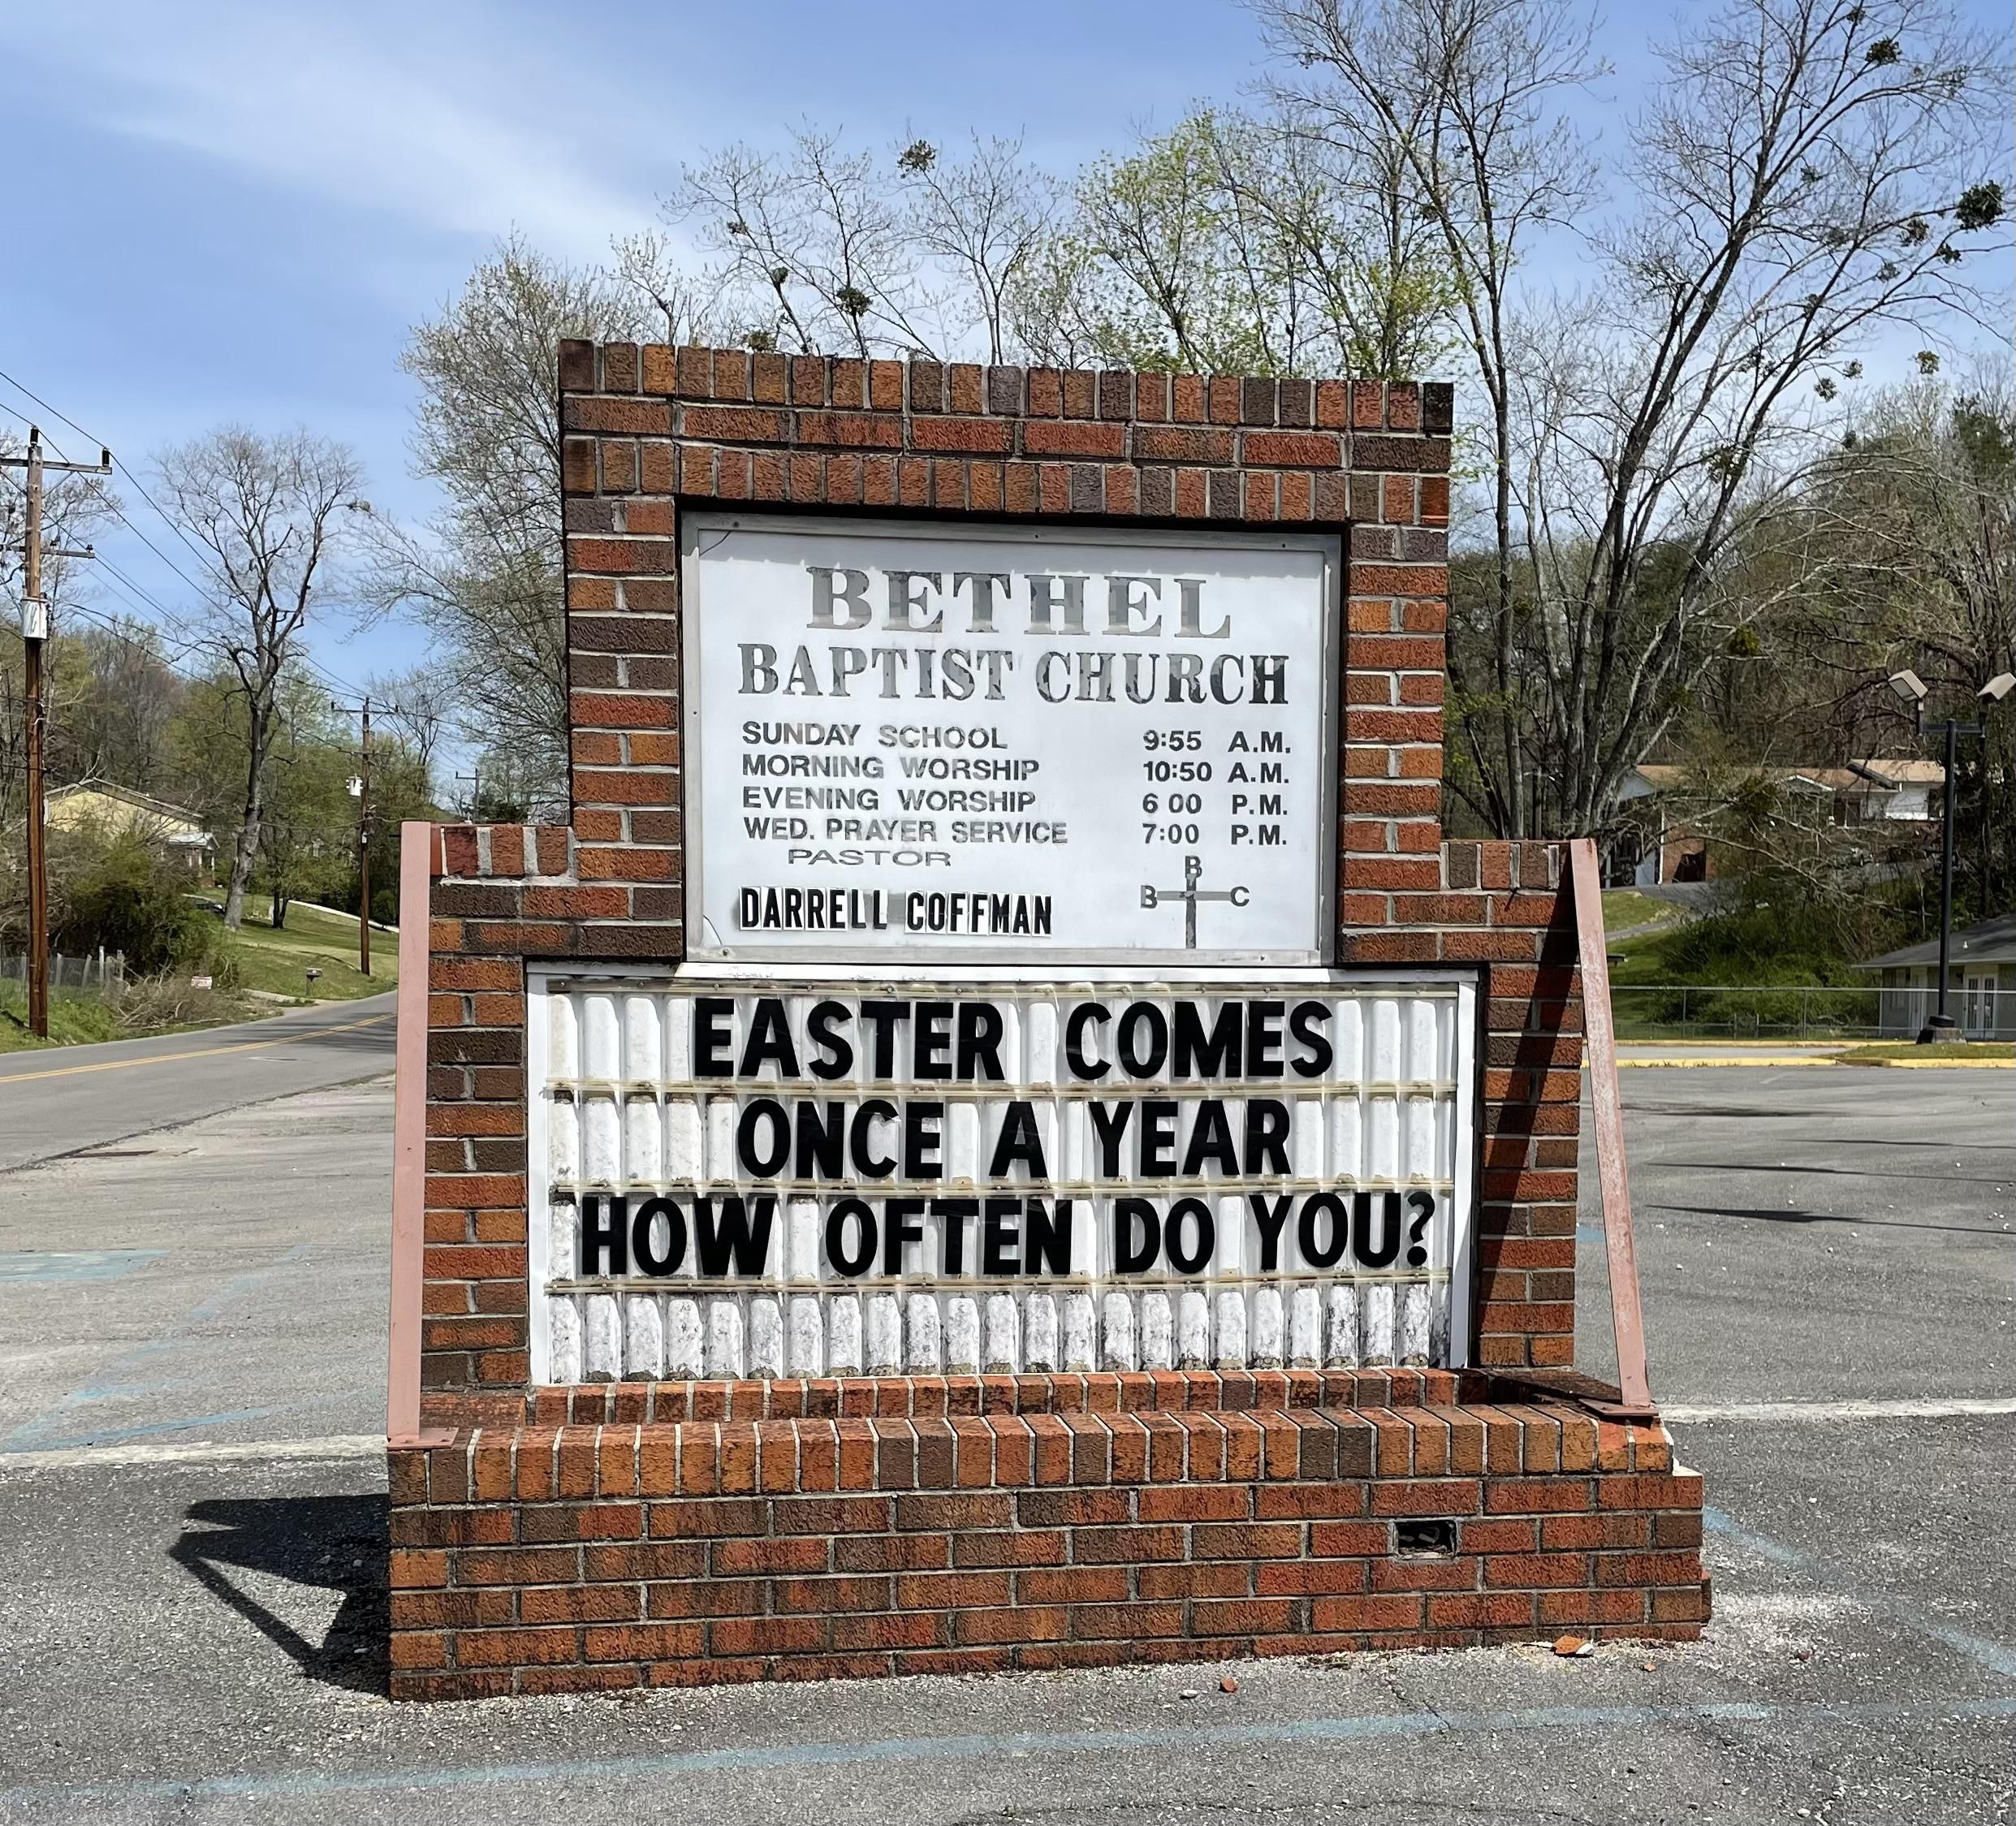 Church getting a little personal this year.